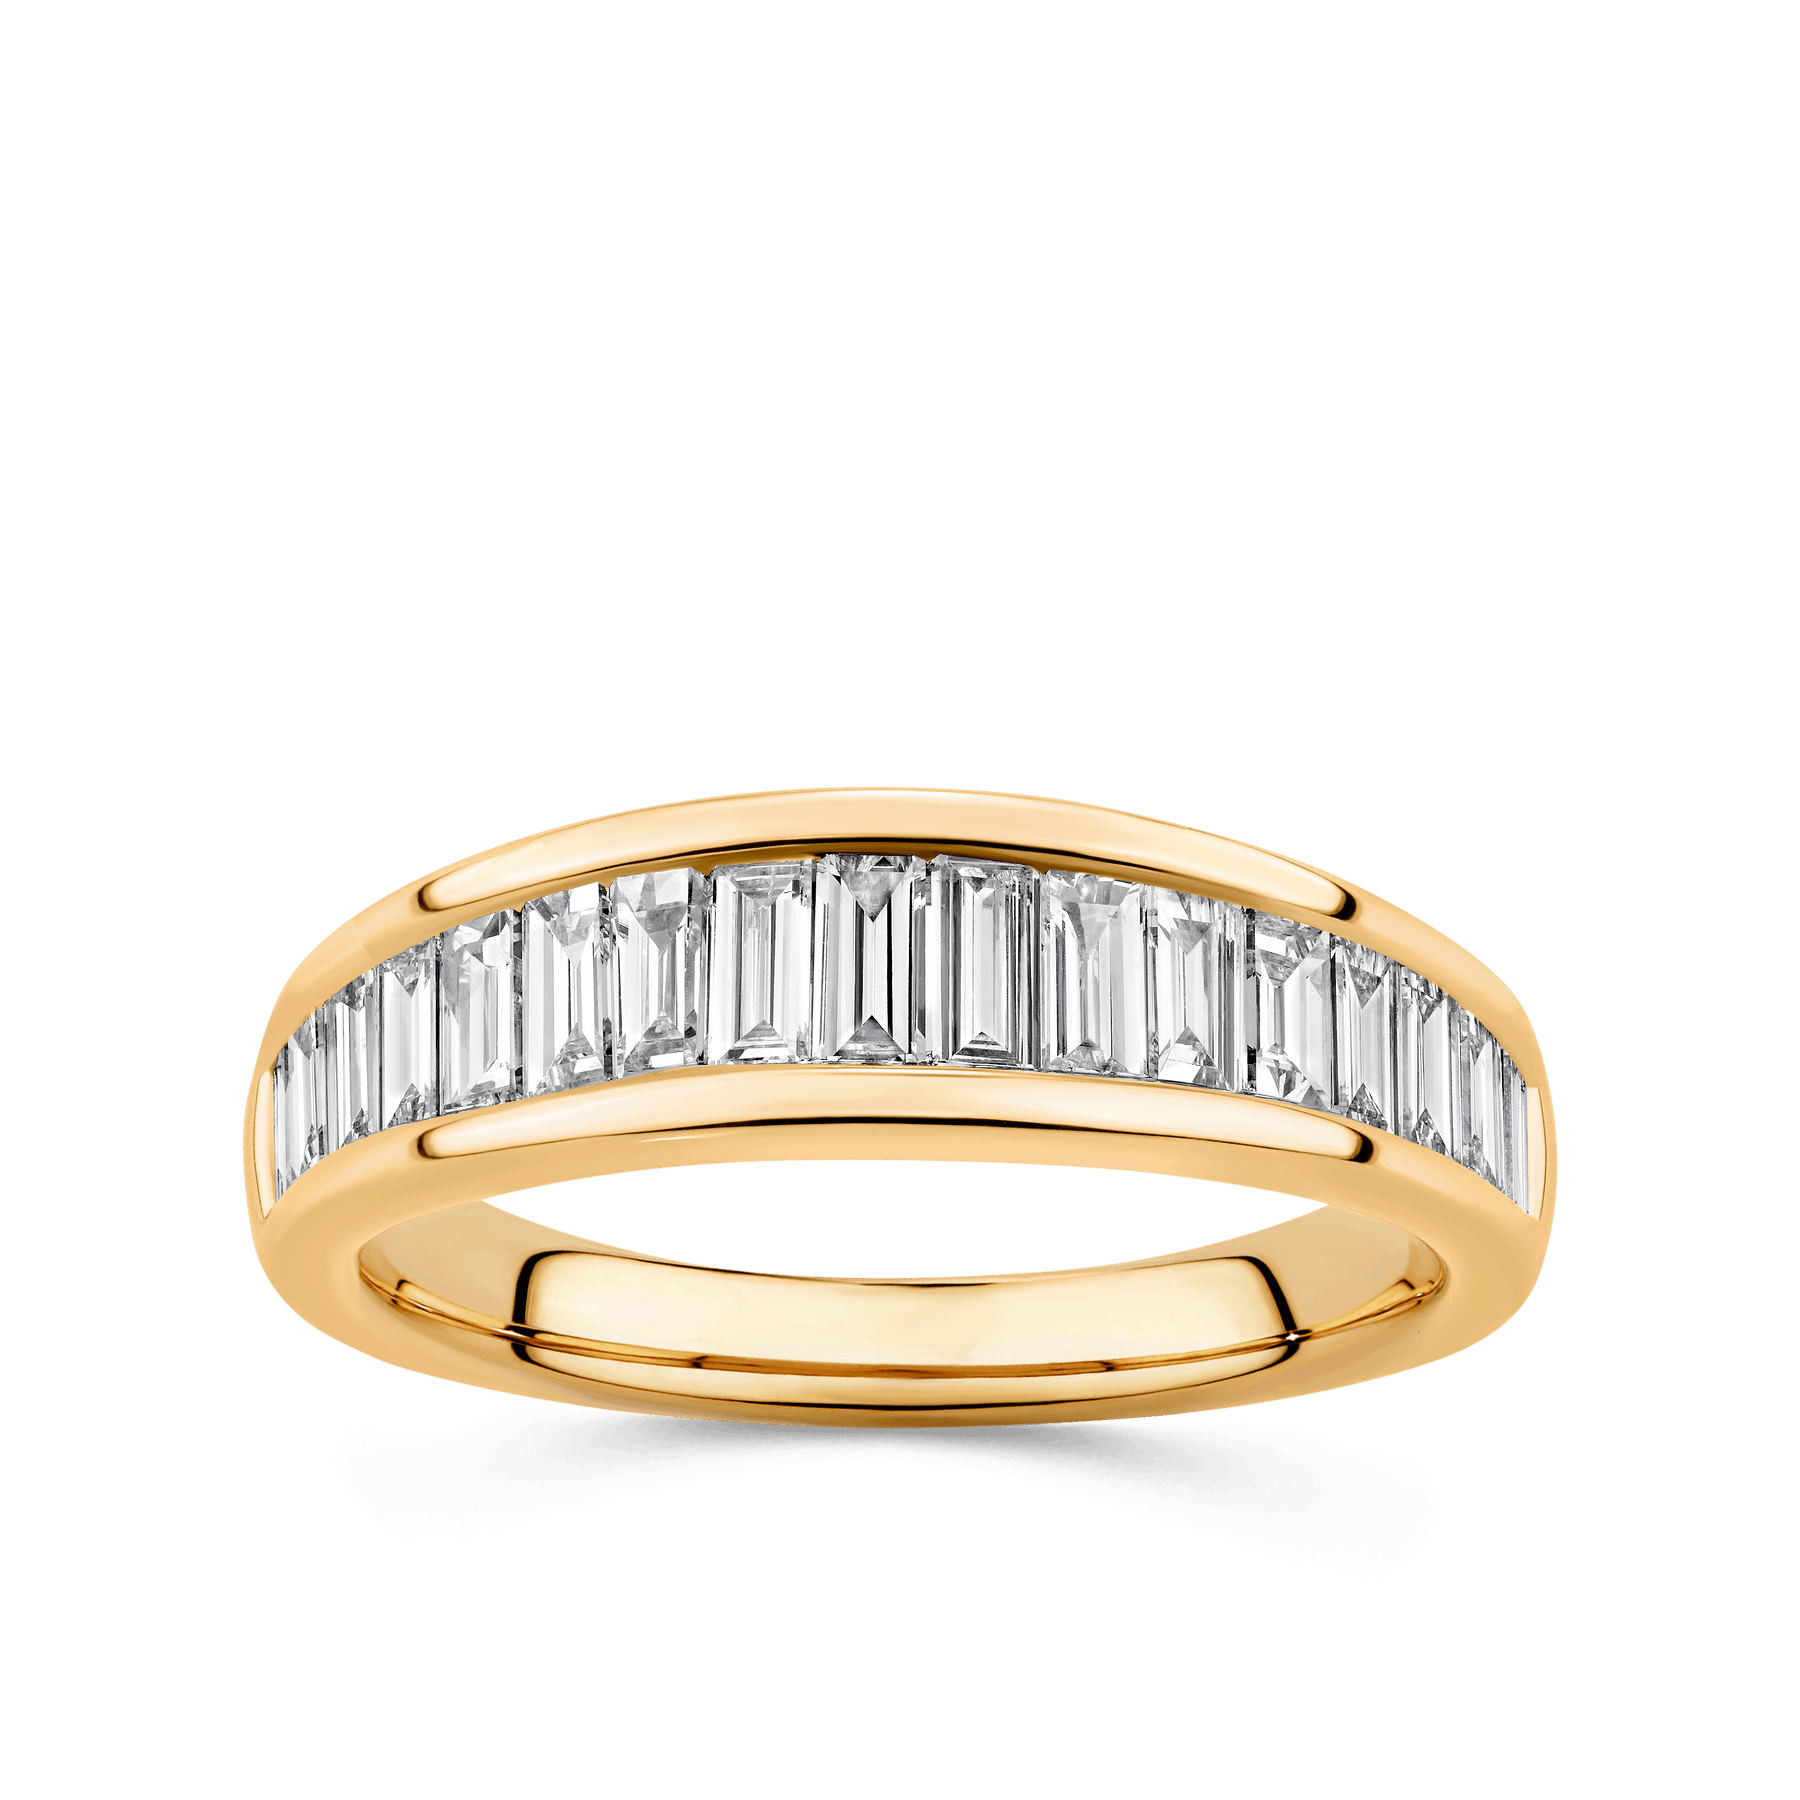 1ct TW Diamond Baguette Ring in 9ct Yellow Gold - Wallace Bishop